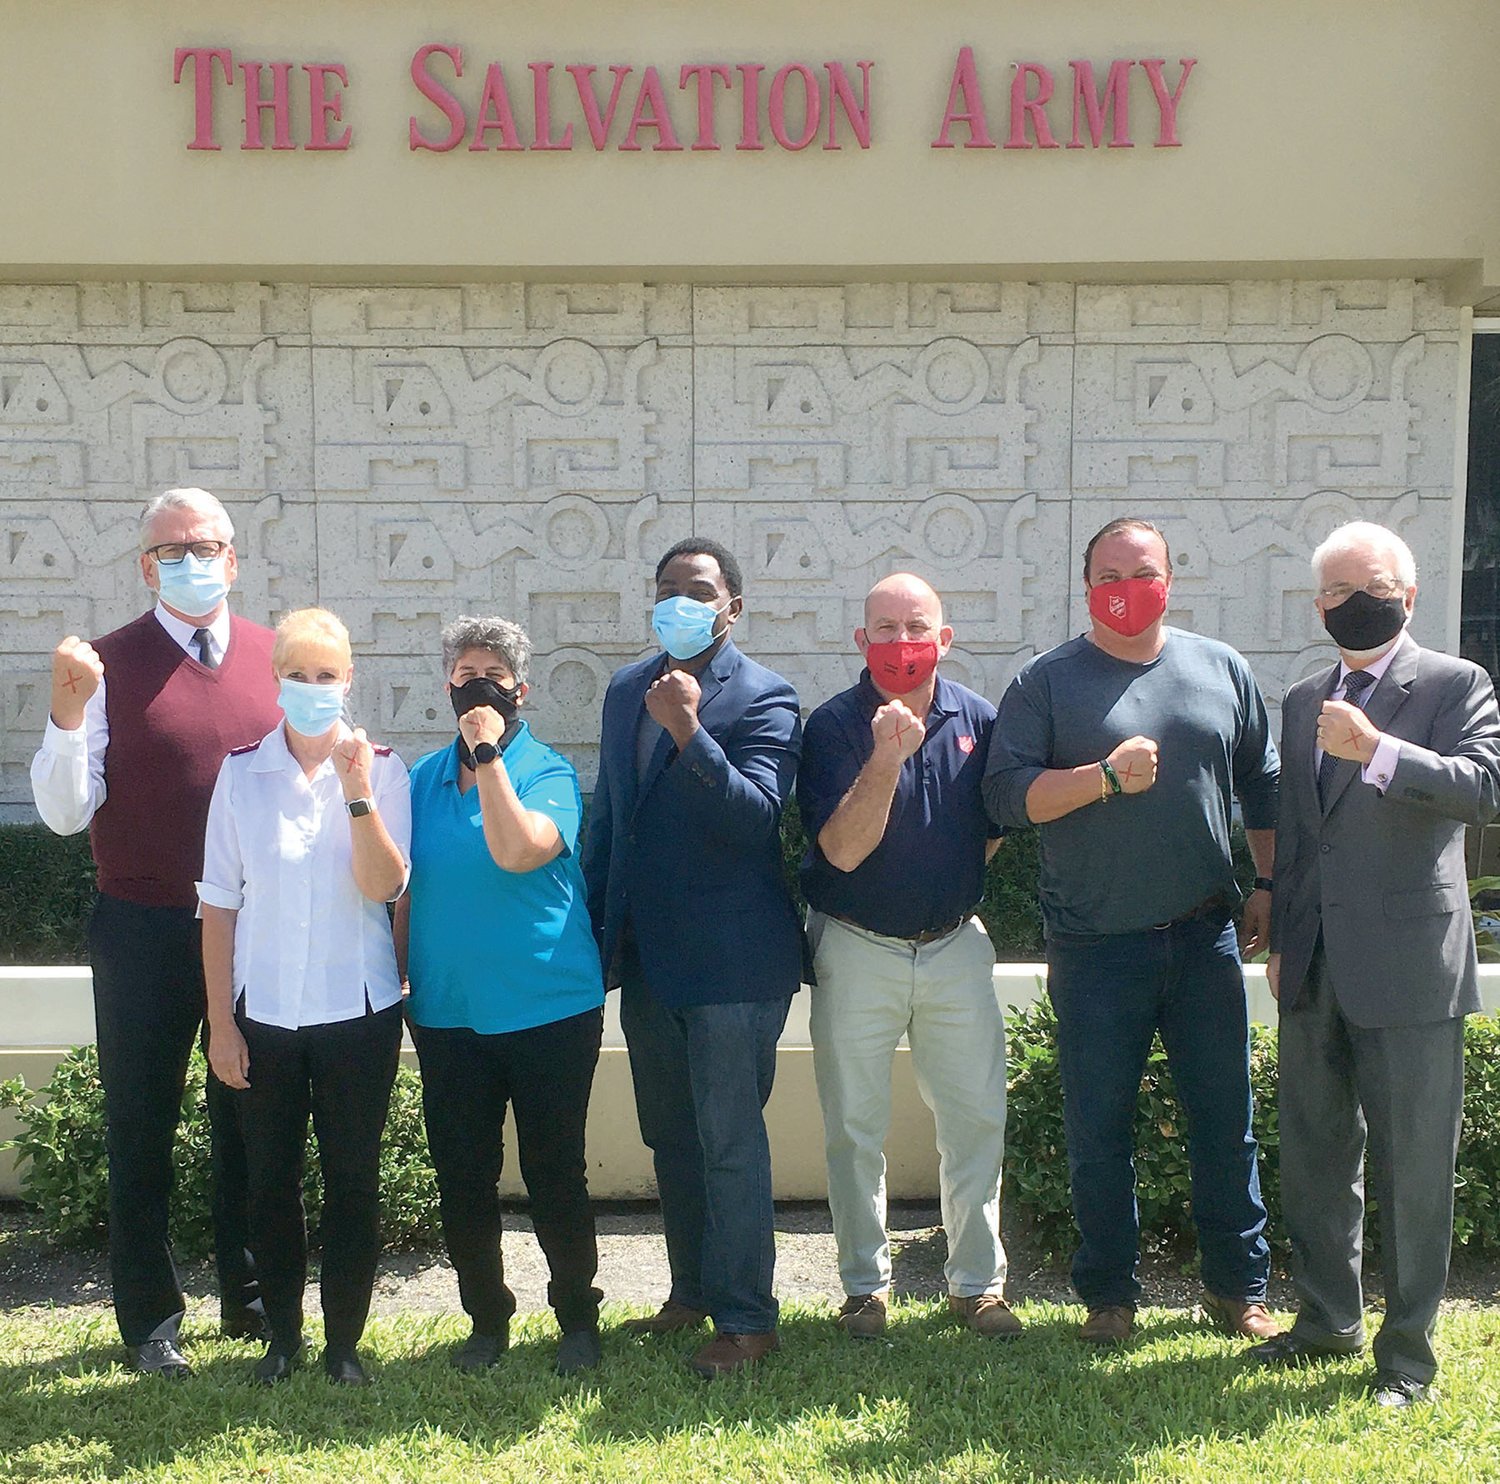 Majors Chip and Leisa Hall, Area Commanders of The Salvation Army of Palm Beach County, along with Area Command department heads, blazed the path in the fight against human trafficking by boldly displaying the RED X on END IT DAY 2021.